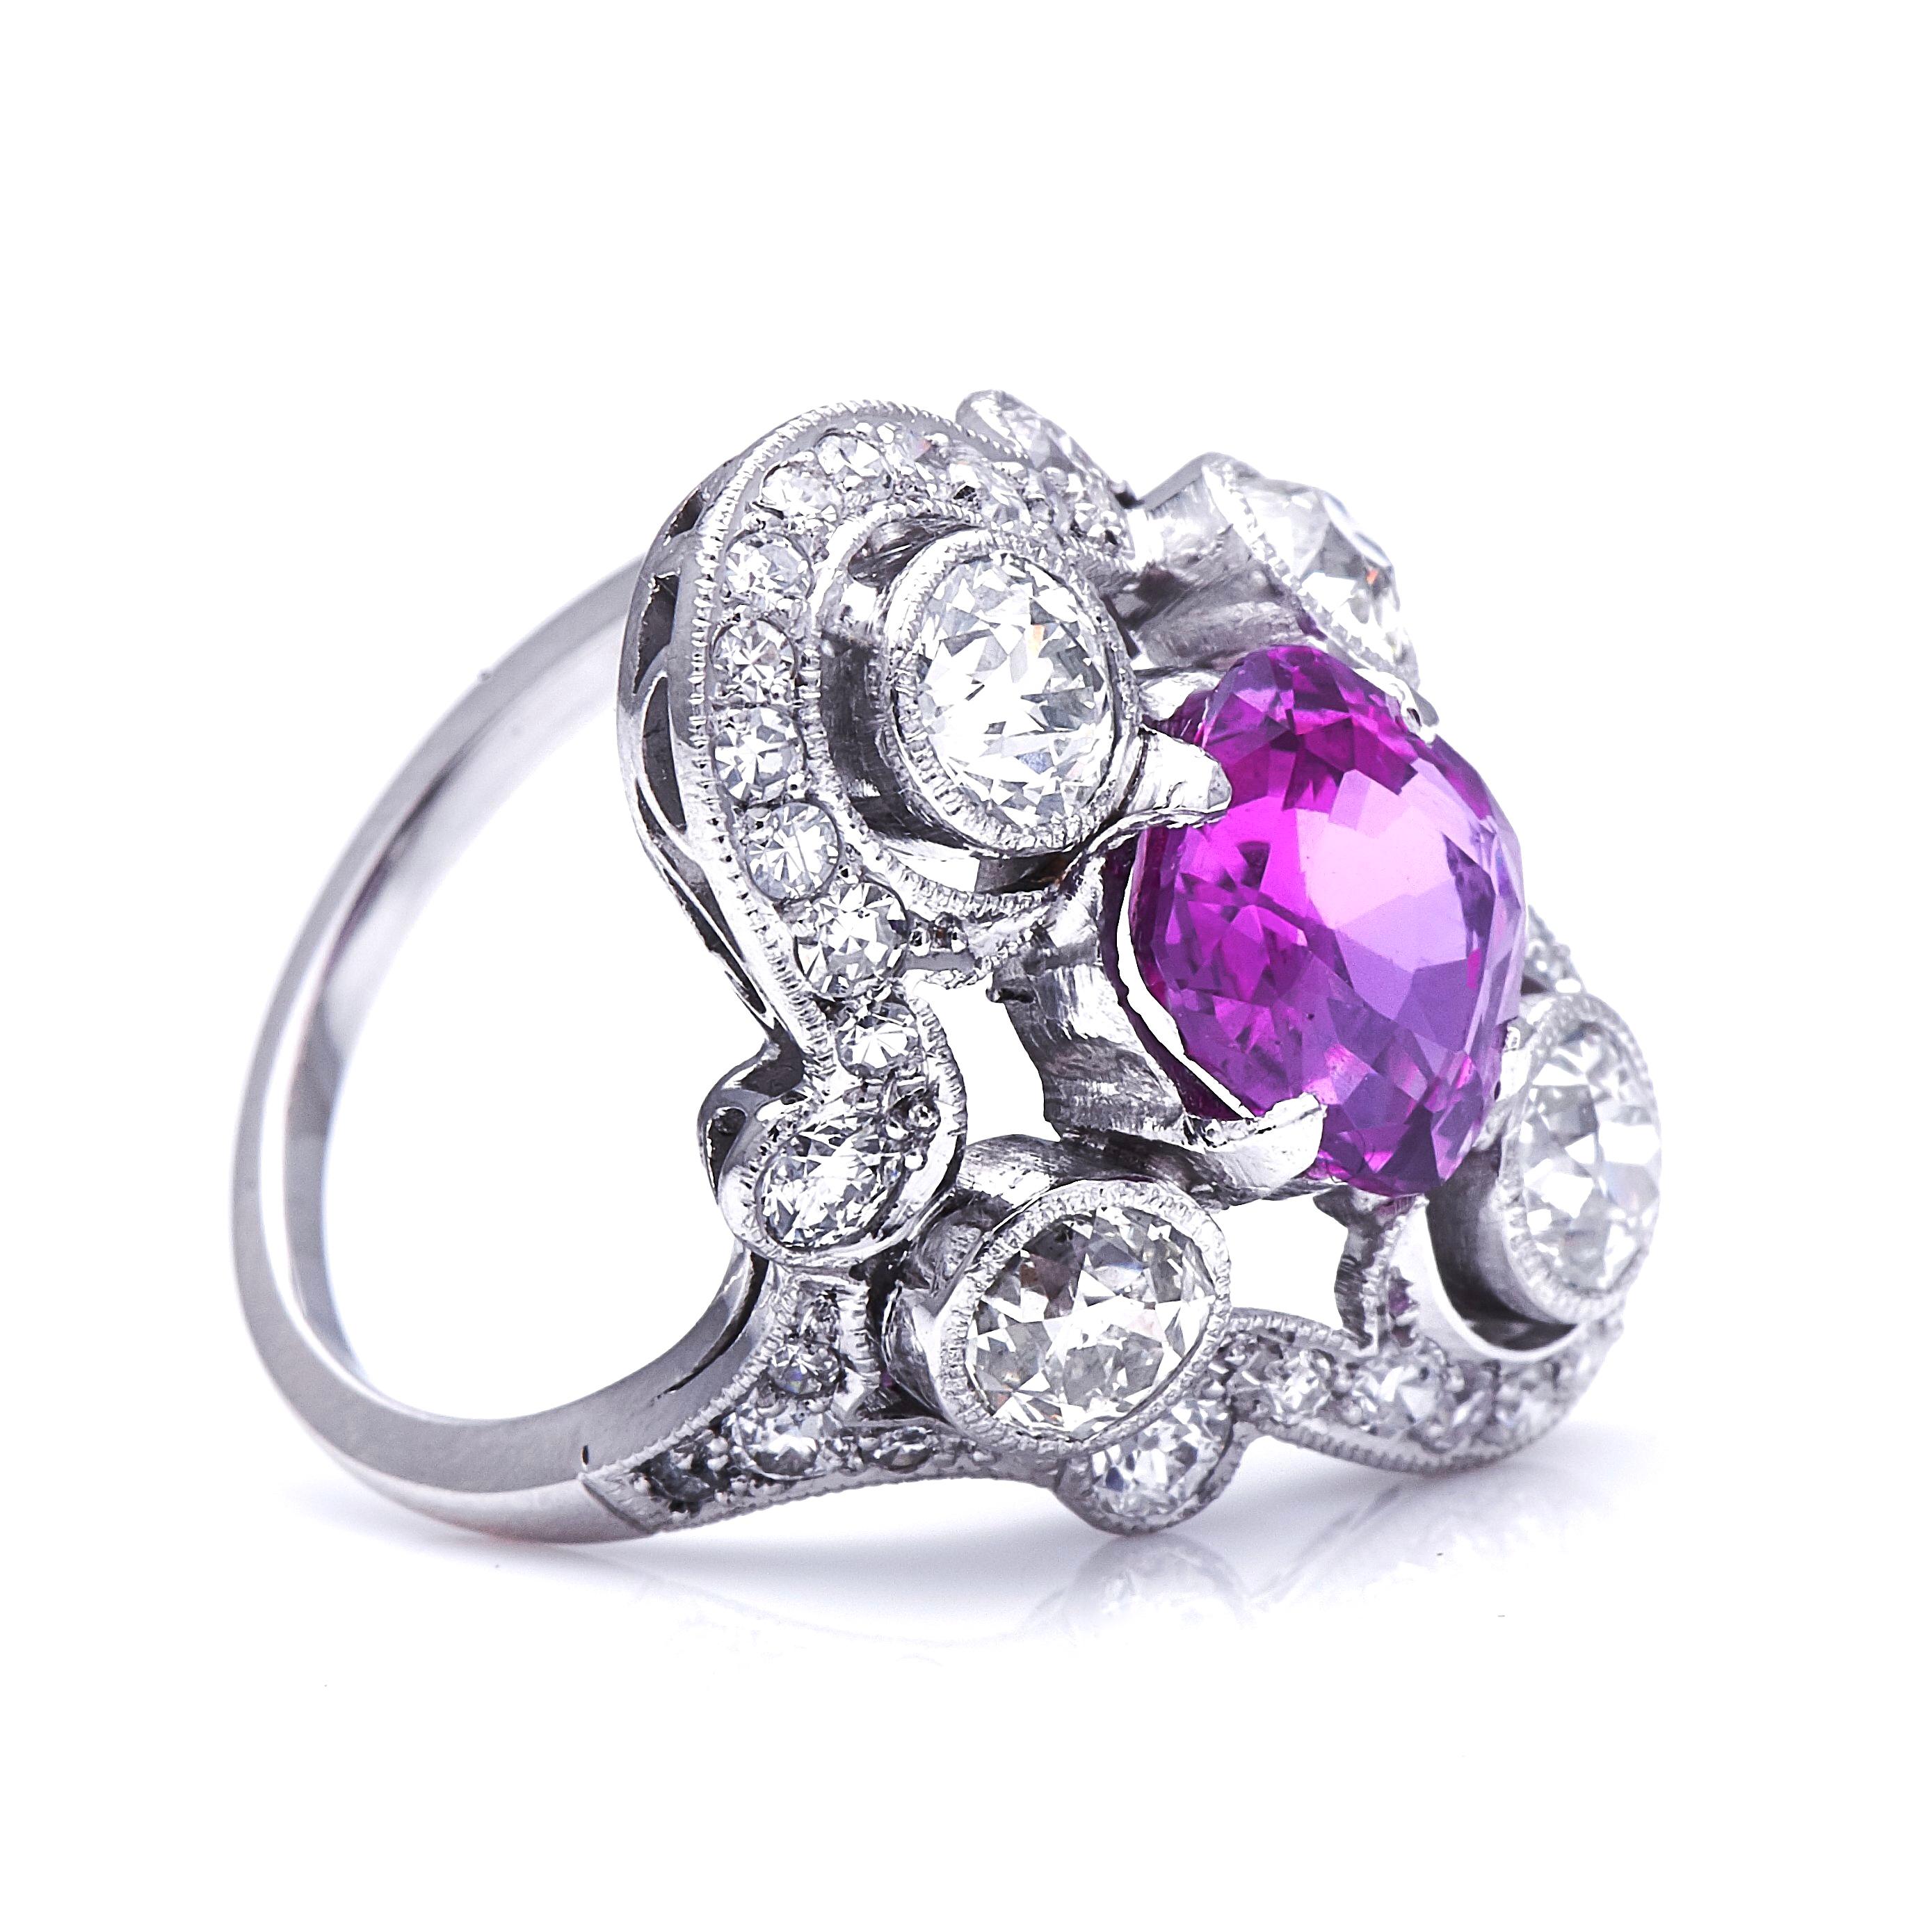 Pink sapphire and diamond ring, circa 1925. Sri Lanka is the most historically famous source of sapphires, and was colloquially known as ‘Ratna Dweepa’, or the ‘Island of Gems’. This 3.45 carat unheated Sri Lankan sapphire displays a floral